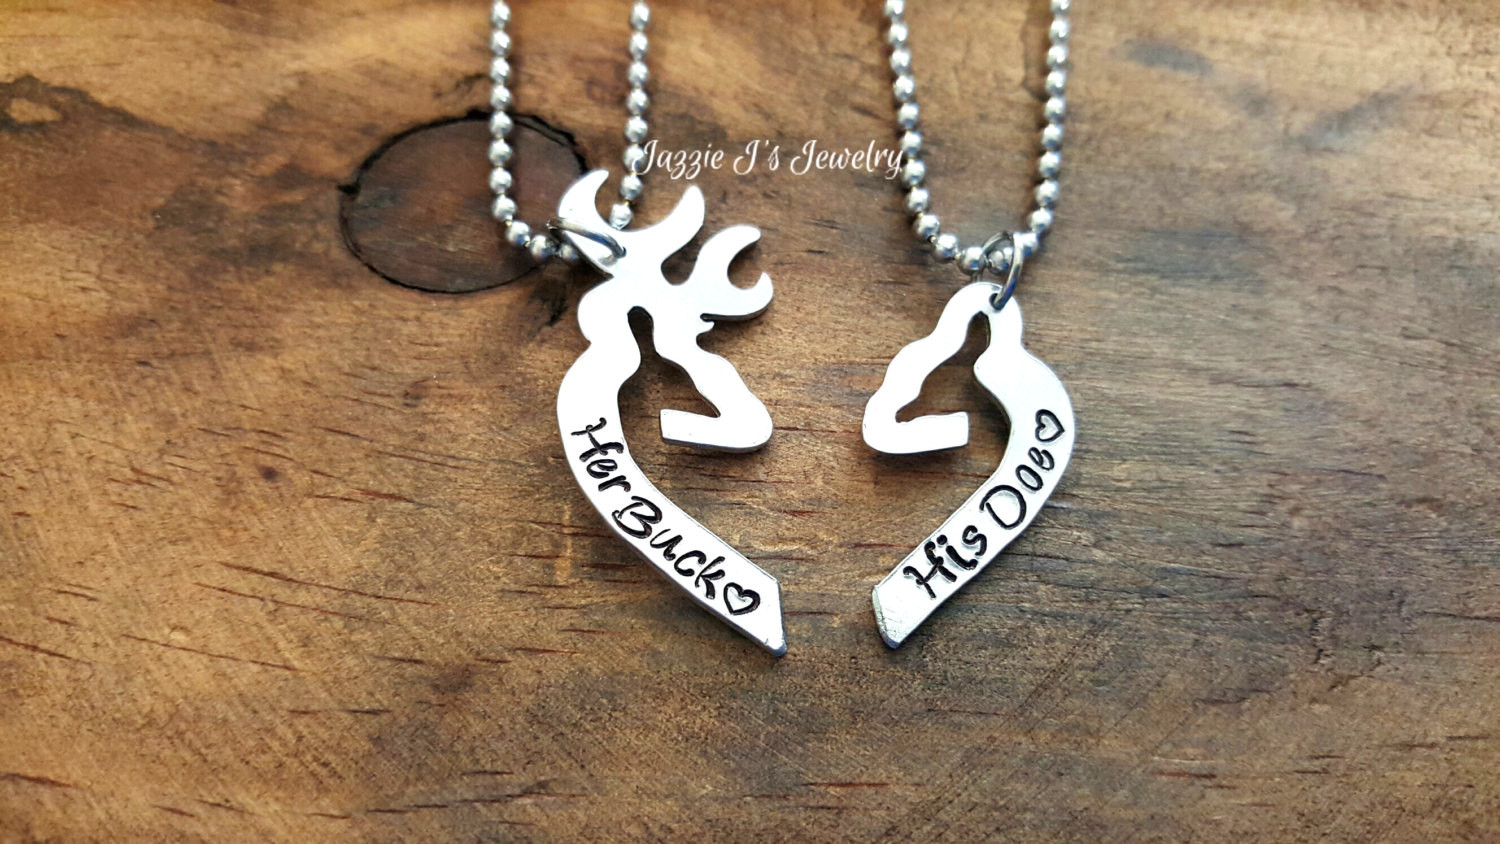 His And Her Buck And Doe Necklaces
 Her Buck His Doe Necklace Set Personalized Set by